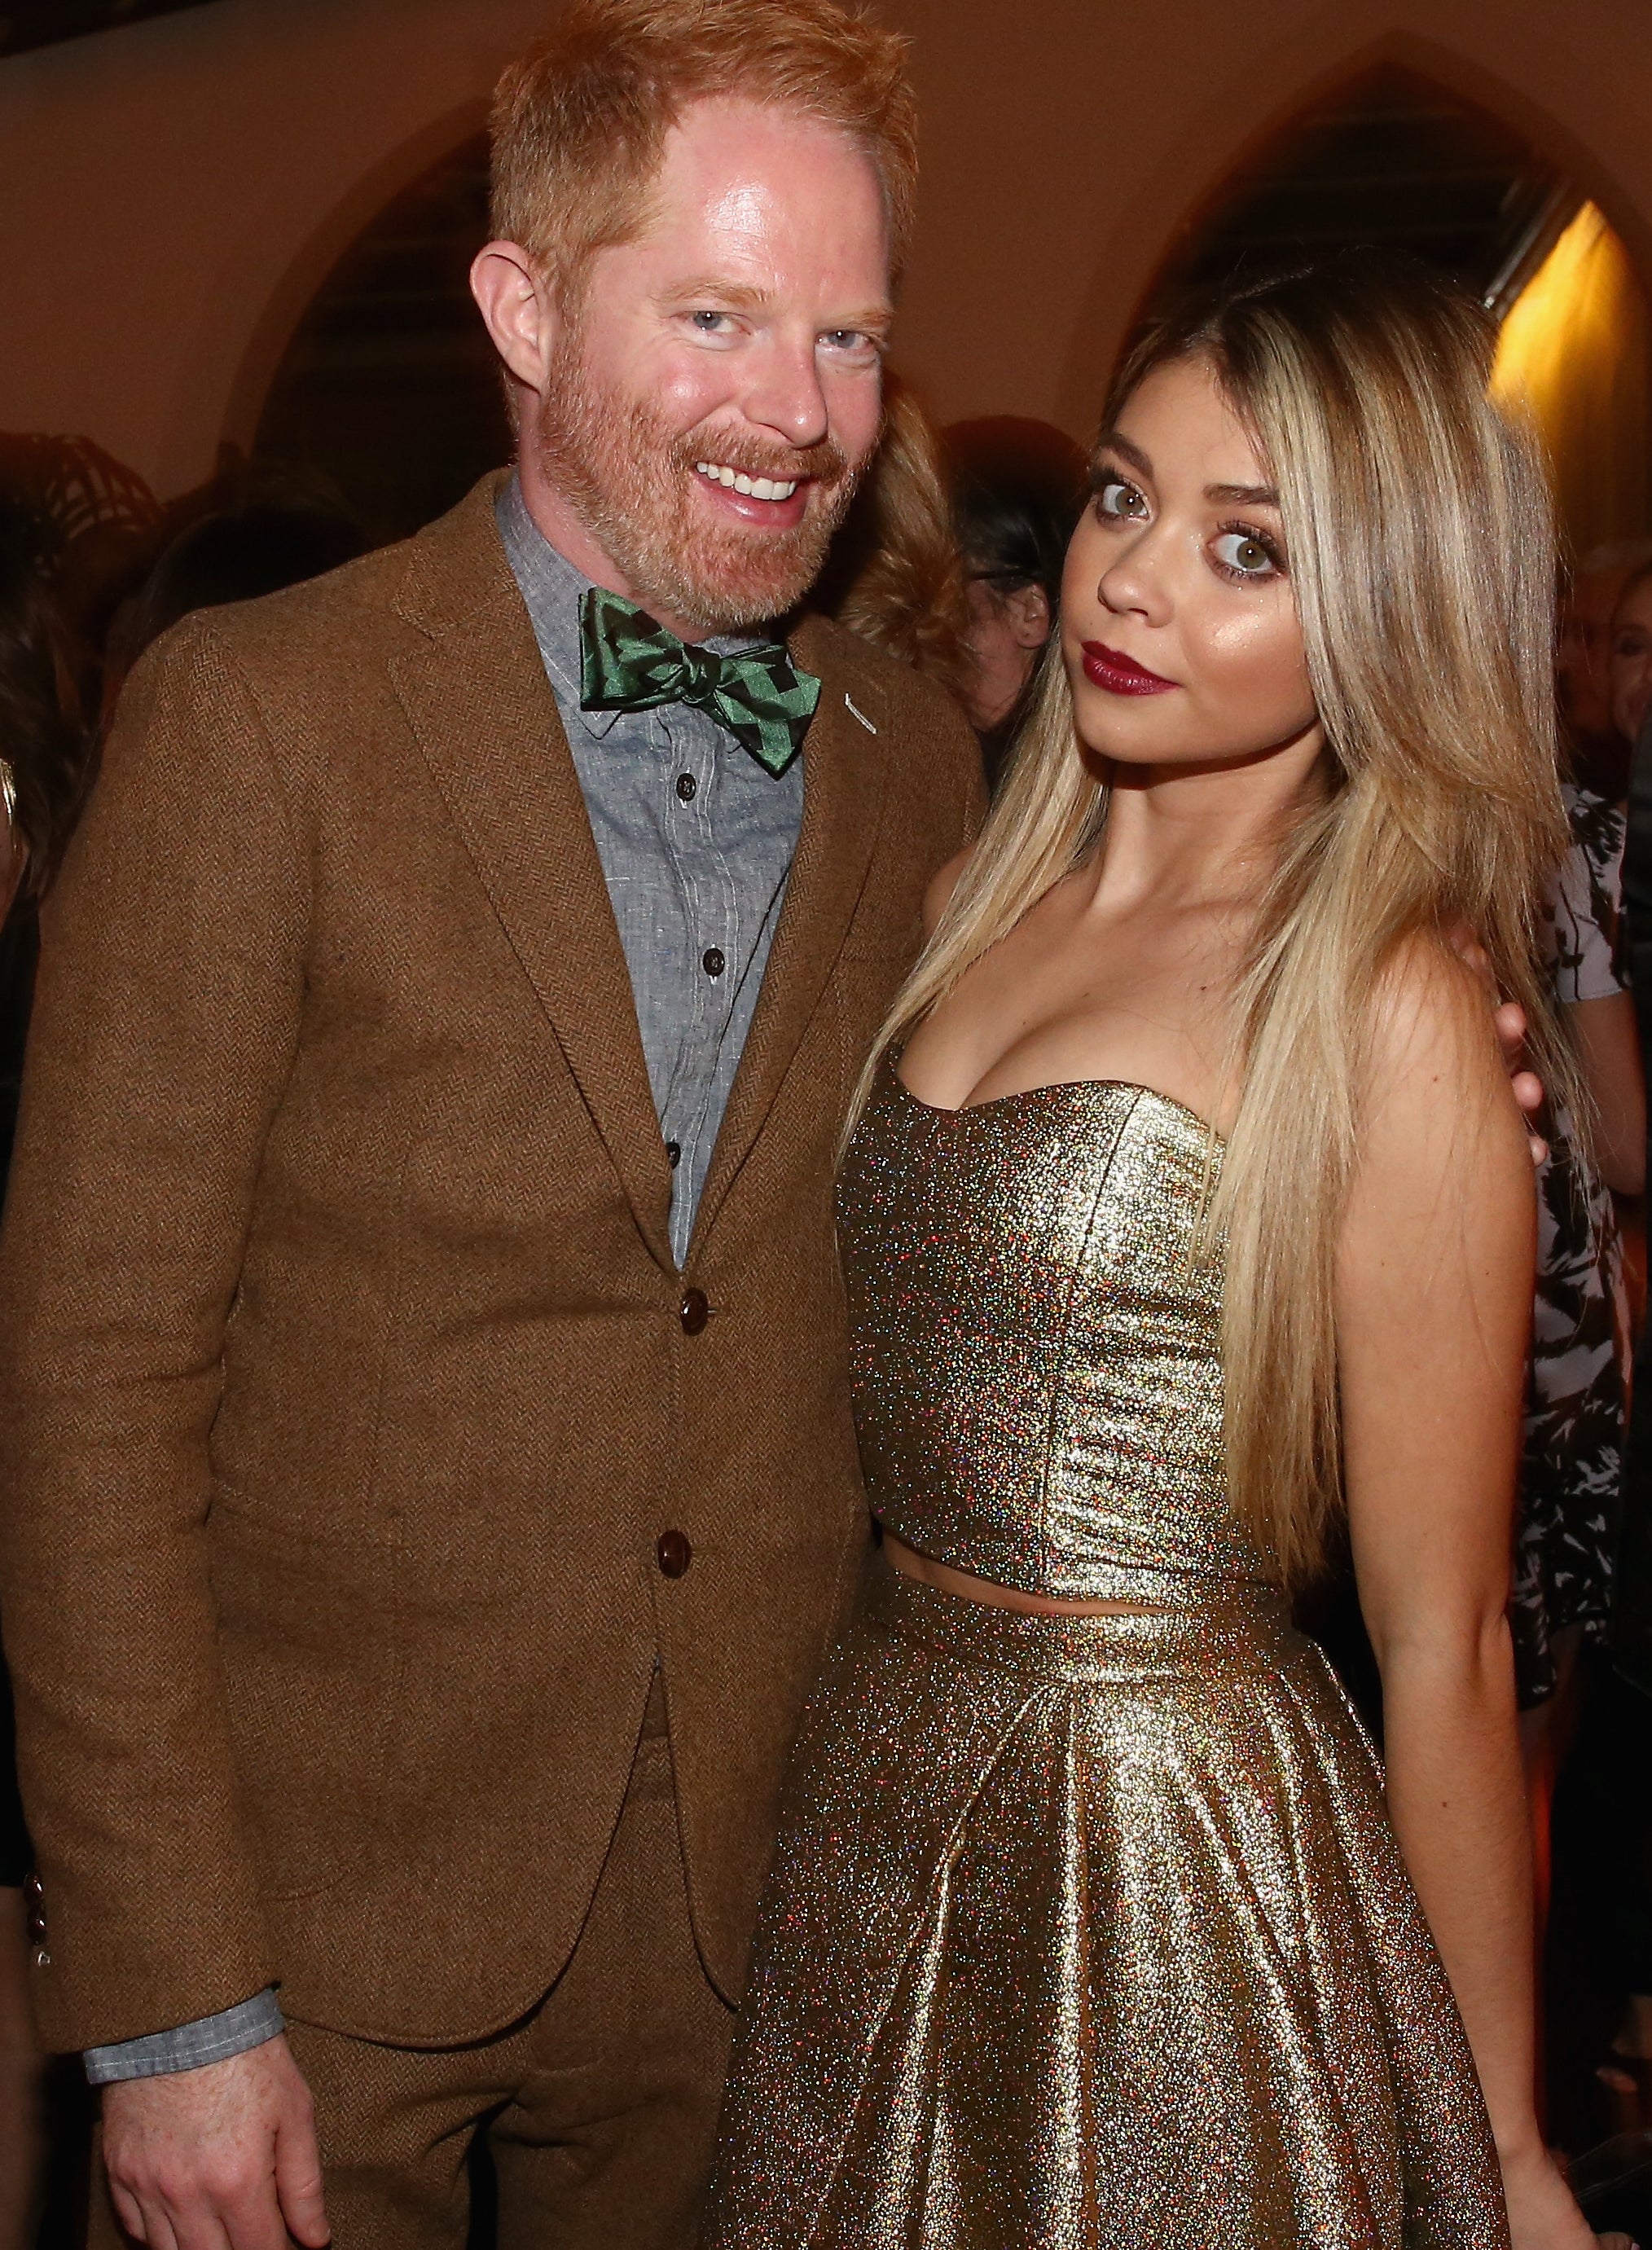 Jesse and Sarah pose for a photo together inside an event. Jesse is wearing a suit and bowtie and Sarah is wearing a strapless metallic top with matching skirt